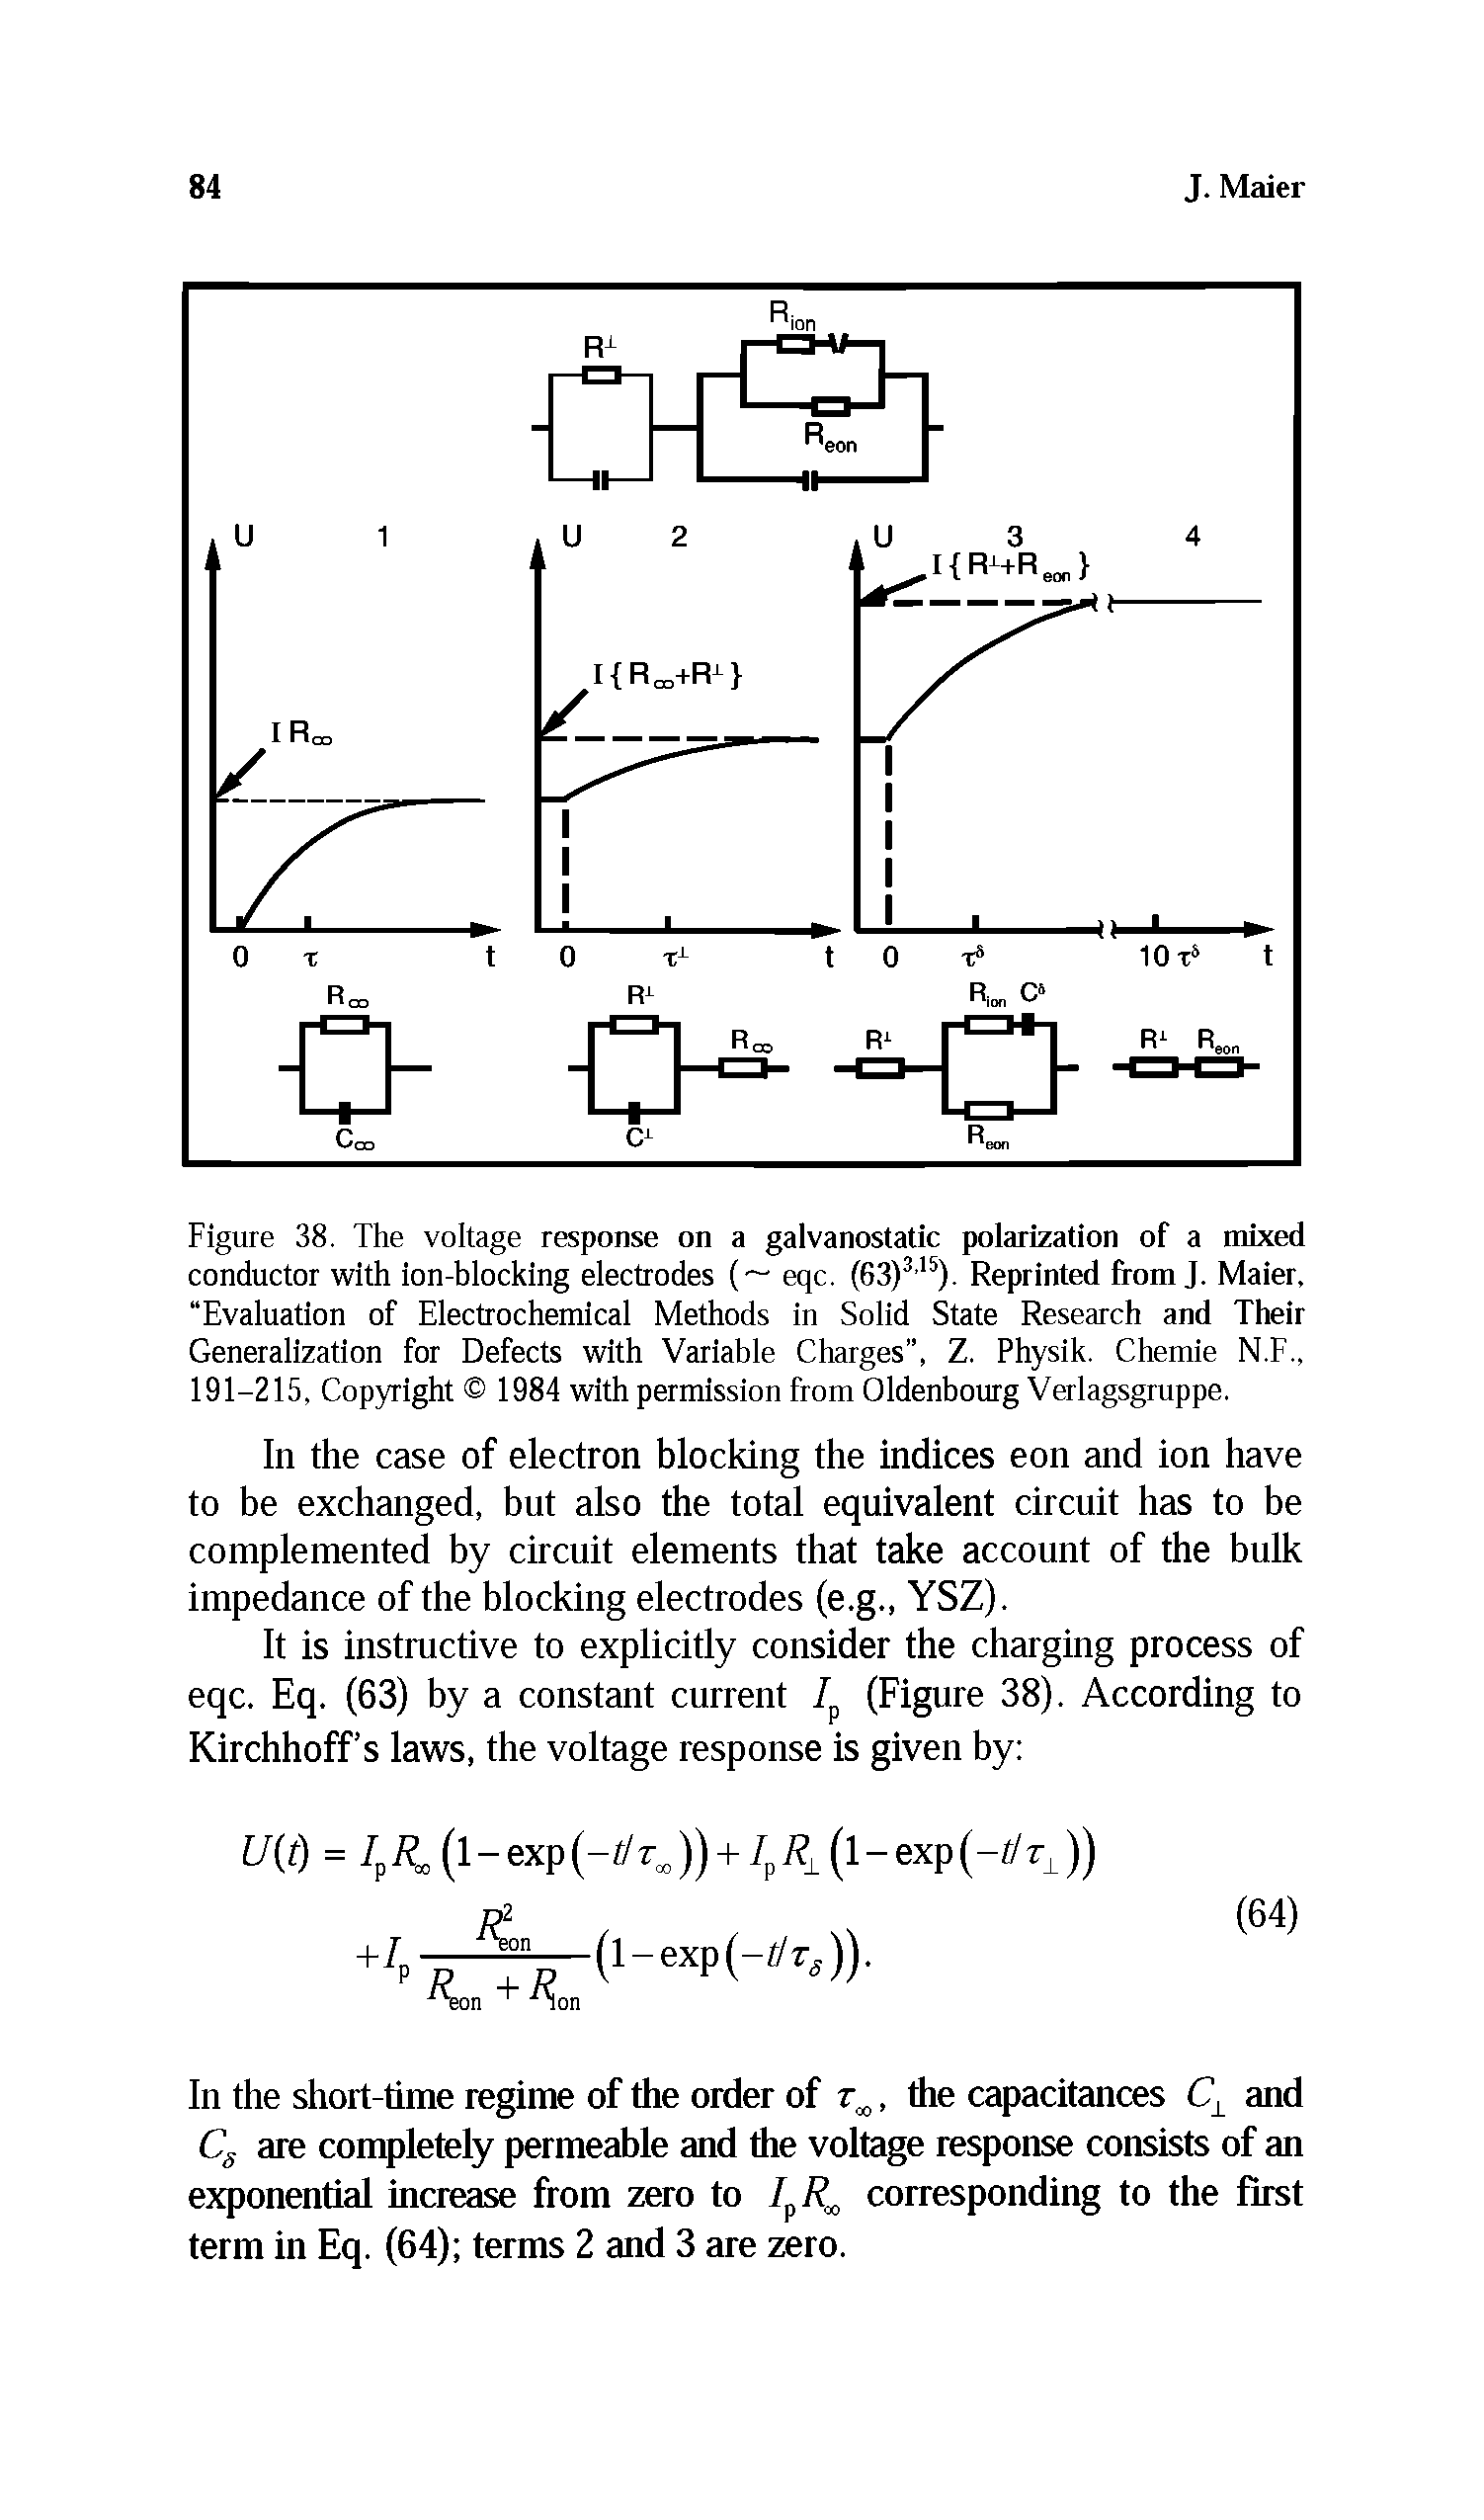 Figure 38. The voltage response on a galvanostatic polarization of a mixed conductor with ion-blocking electrodes ( eqc. (G3)3,15). Reprinted from J. Maier, Evaluation of Electrochemical Methods in Solid State Research and Their Generalization for Defects with Variable Charges , Z. Physik. Chemie N.F., 191-215, Copyright 1984 with permission from Oldenbourg Verlagsgruppe.